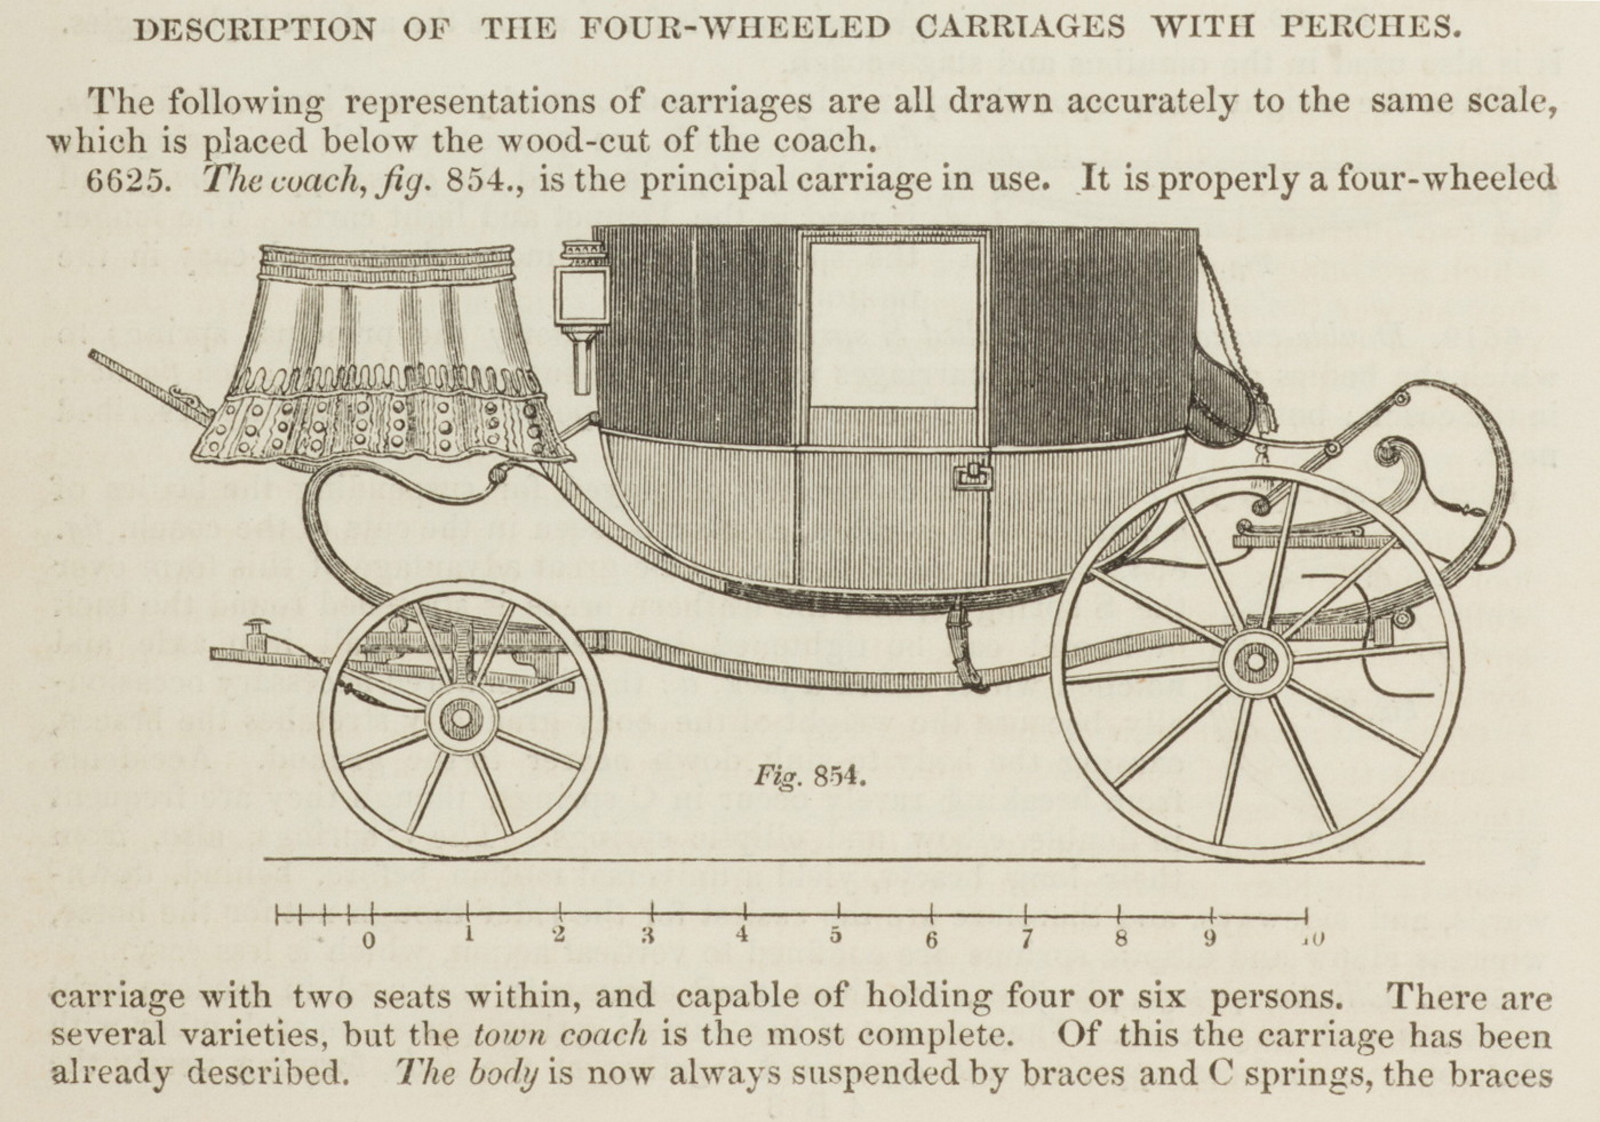 Page 1100 from Thomas Webster: An encyclopaedia of domestic economy, 1847